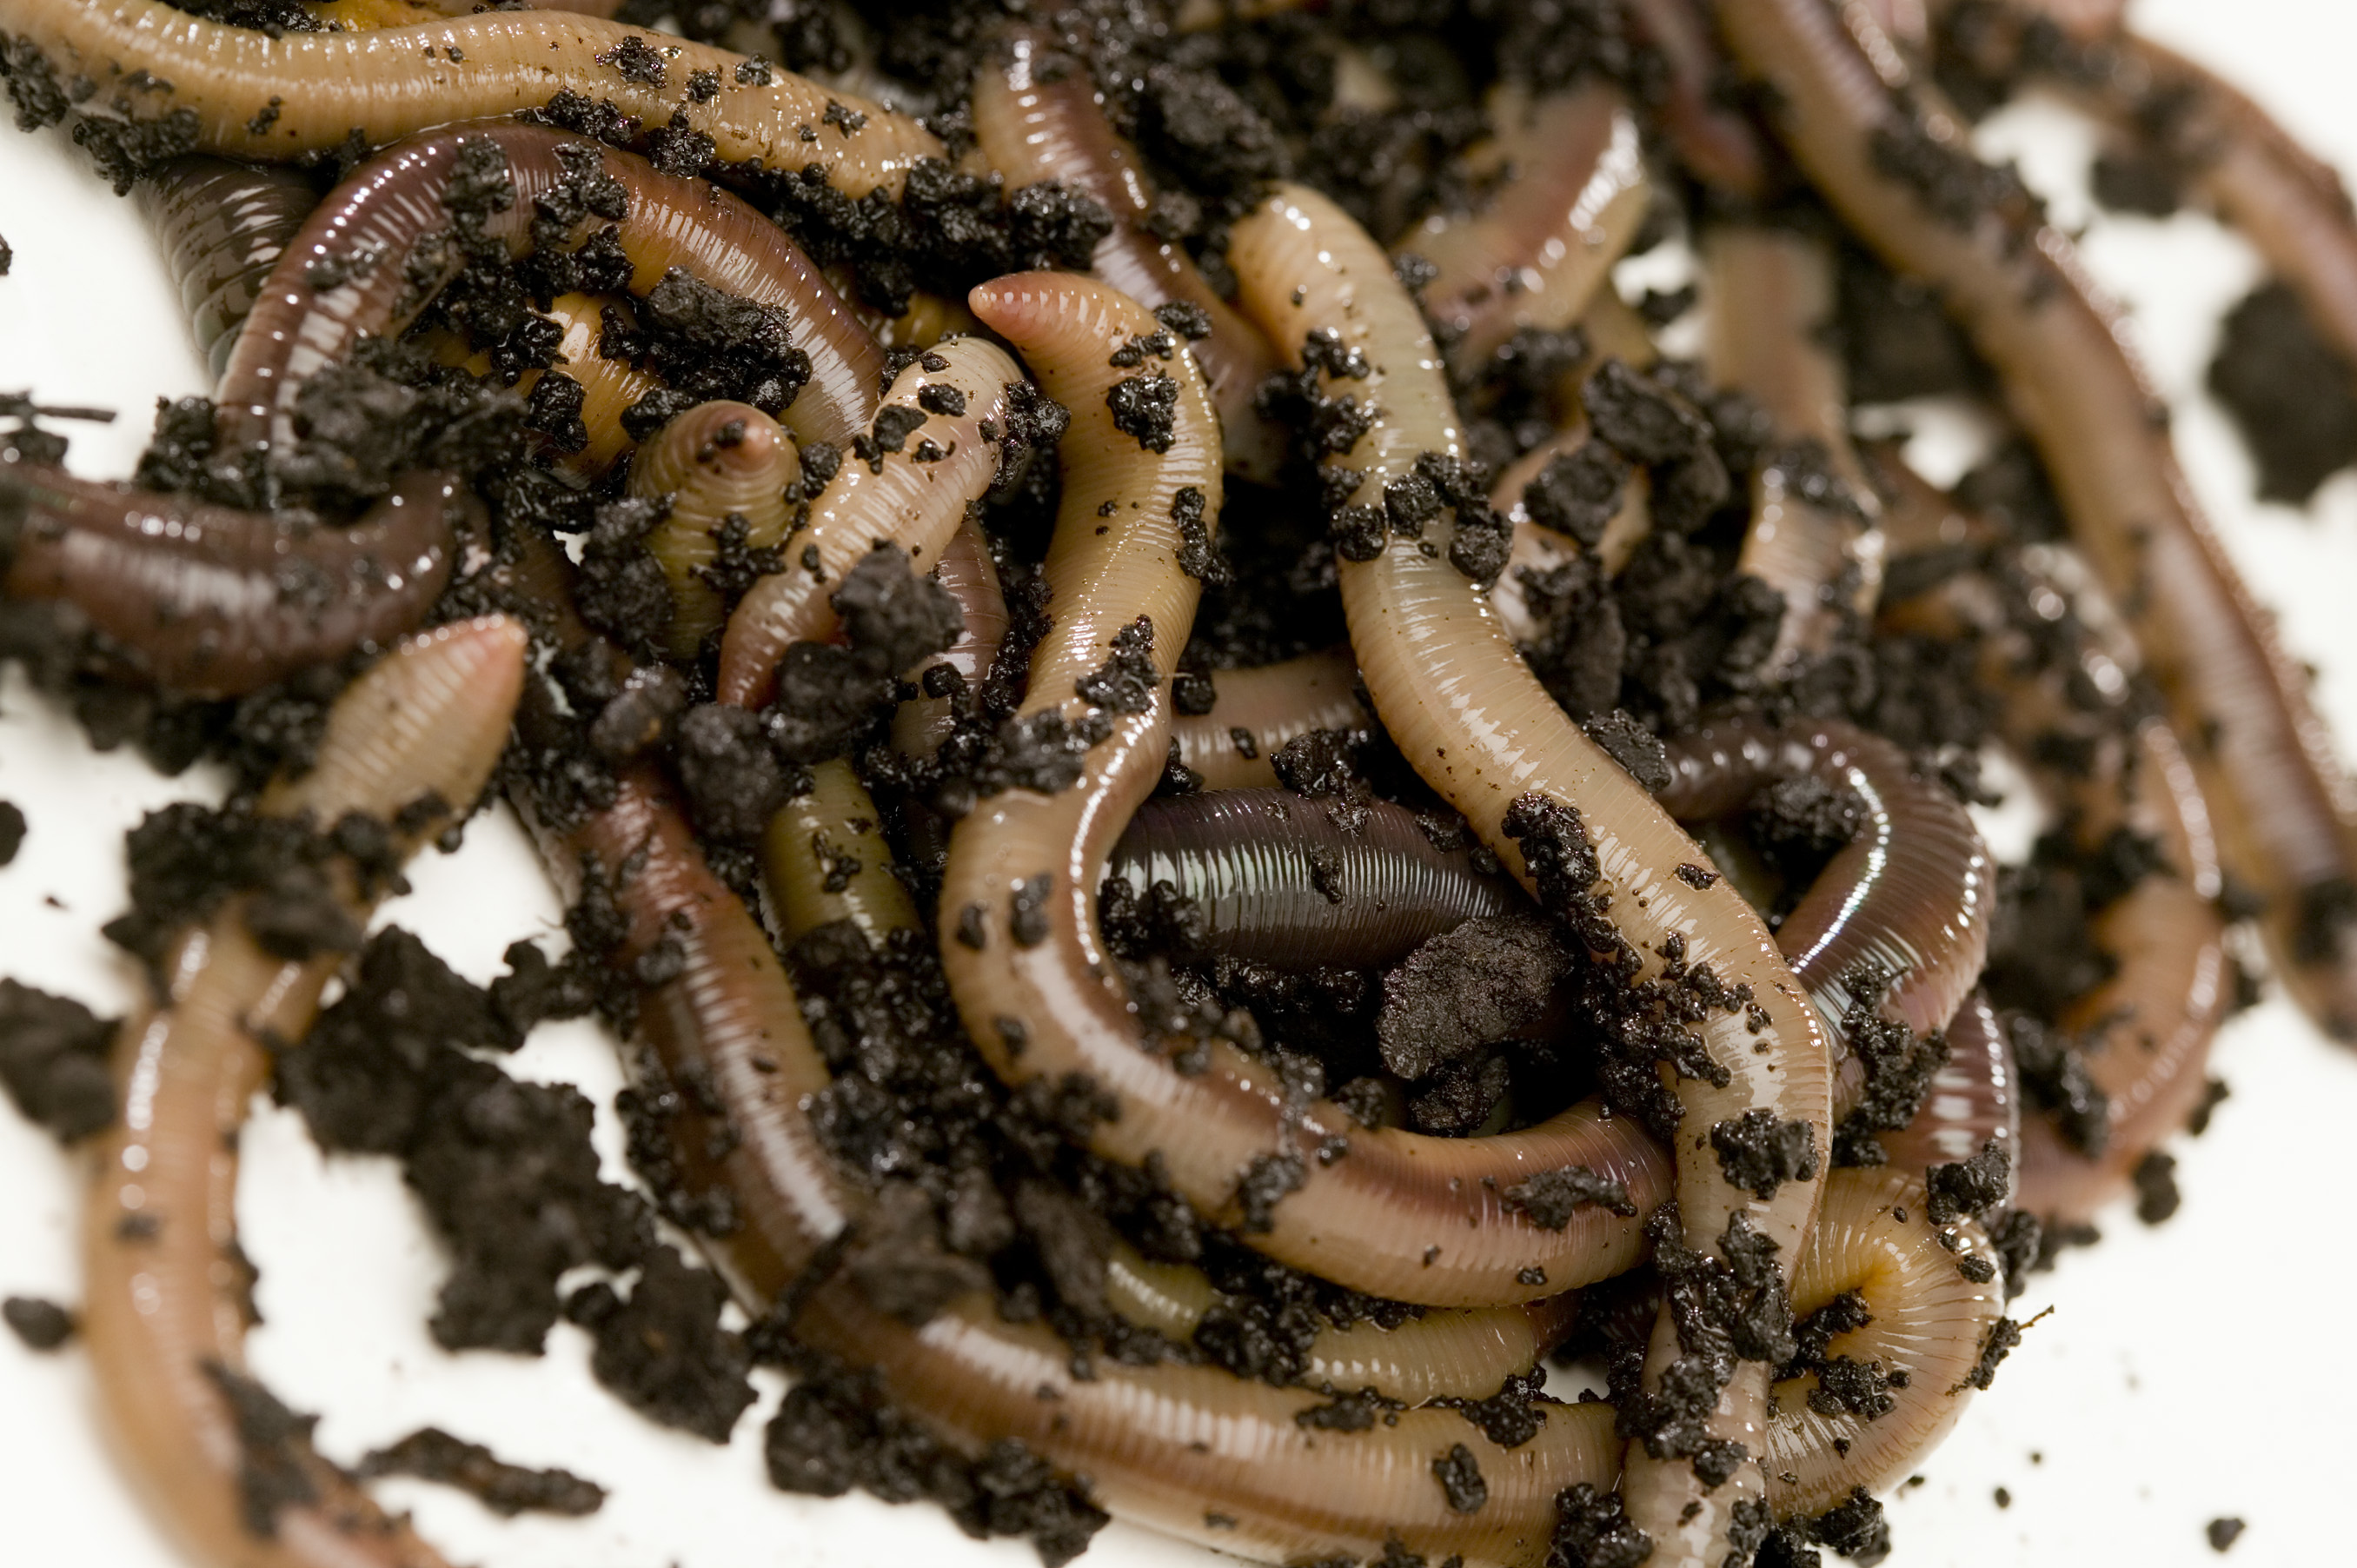 African Night Crawlers – Worms For Worm Farms & Education